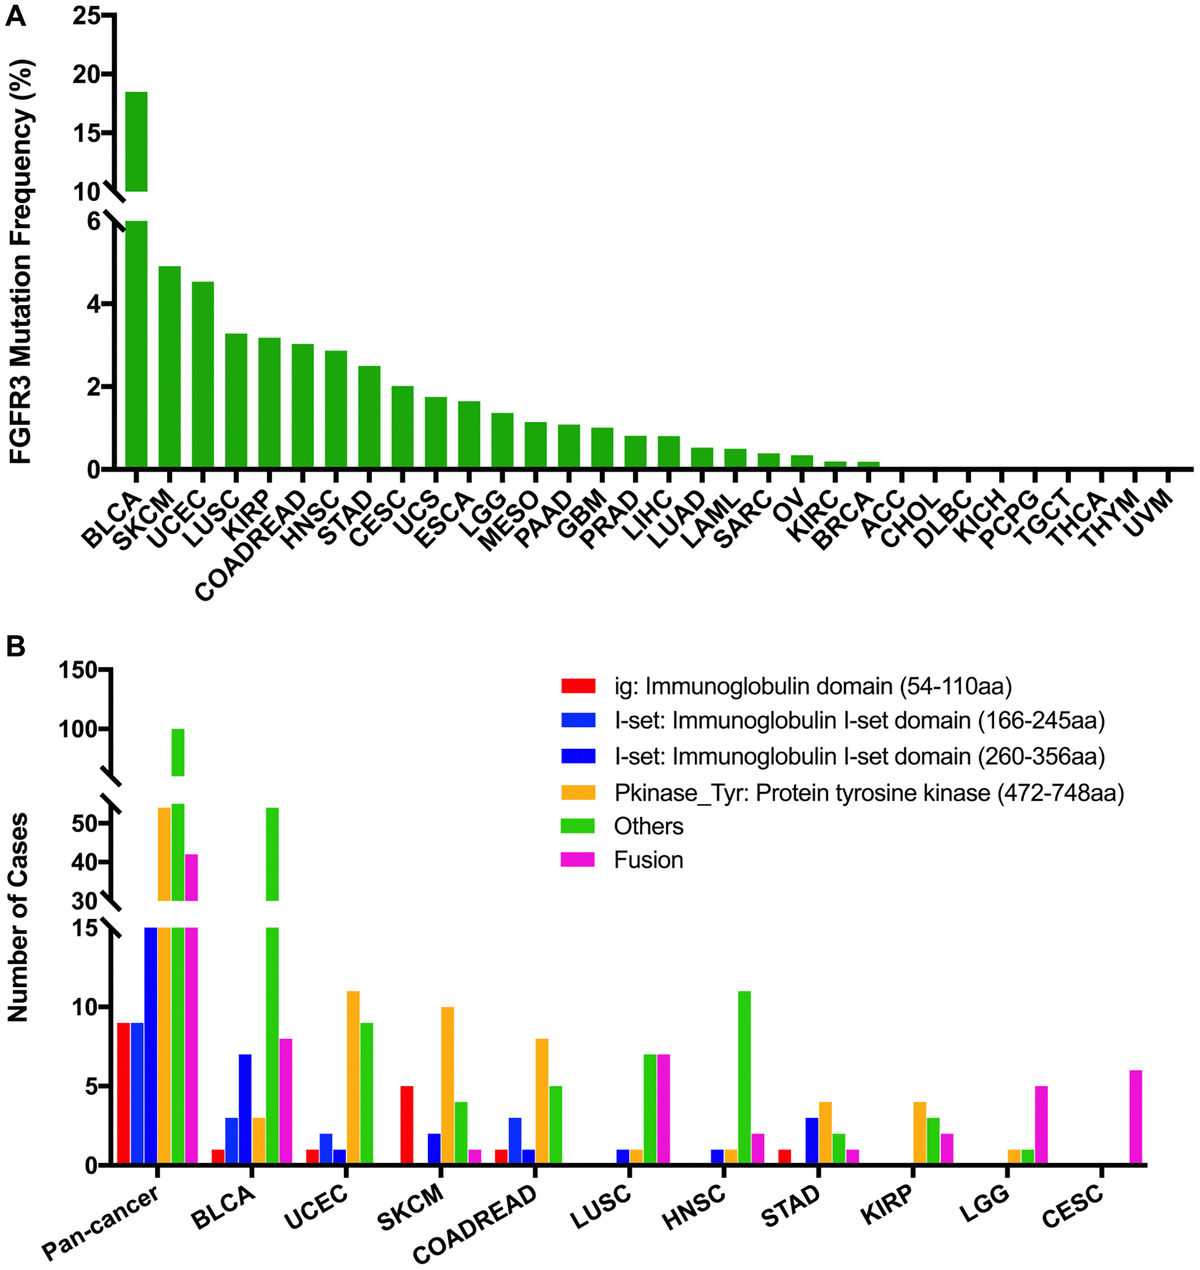 FGFR3 mutation distribution in different cancer types of TCGA and protein functional domains. (A) The mutation frequency of FGFR3 across various tumor types. (B) FGFR3 mutation distribution in different protein functional domains in all and top ten tumor types. Abbreviation: aa: amino acid.